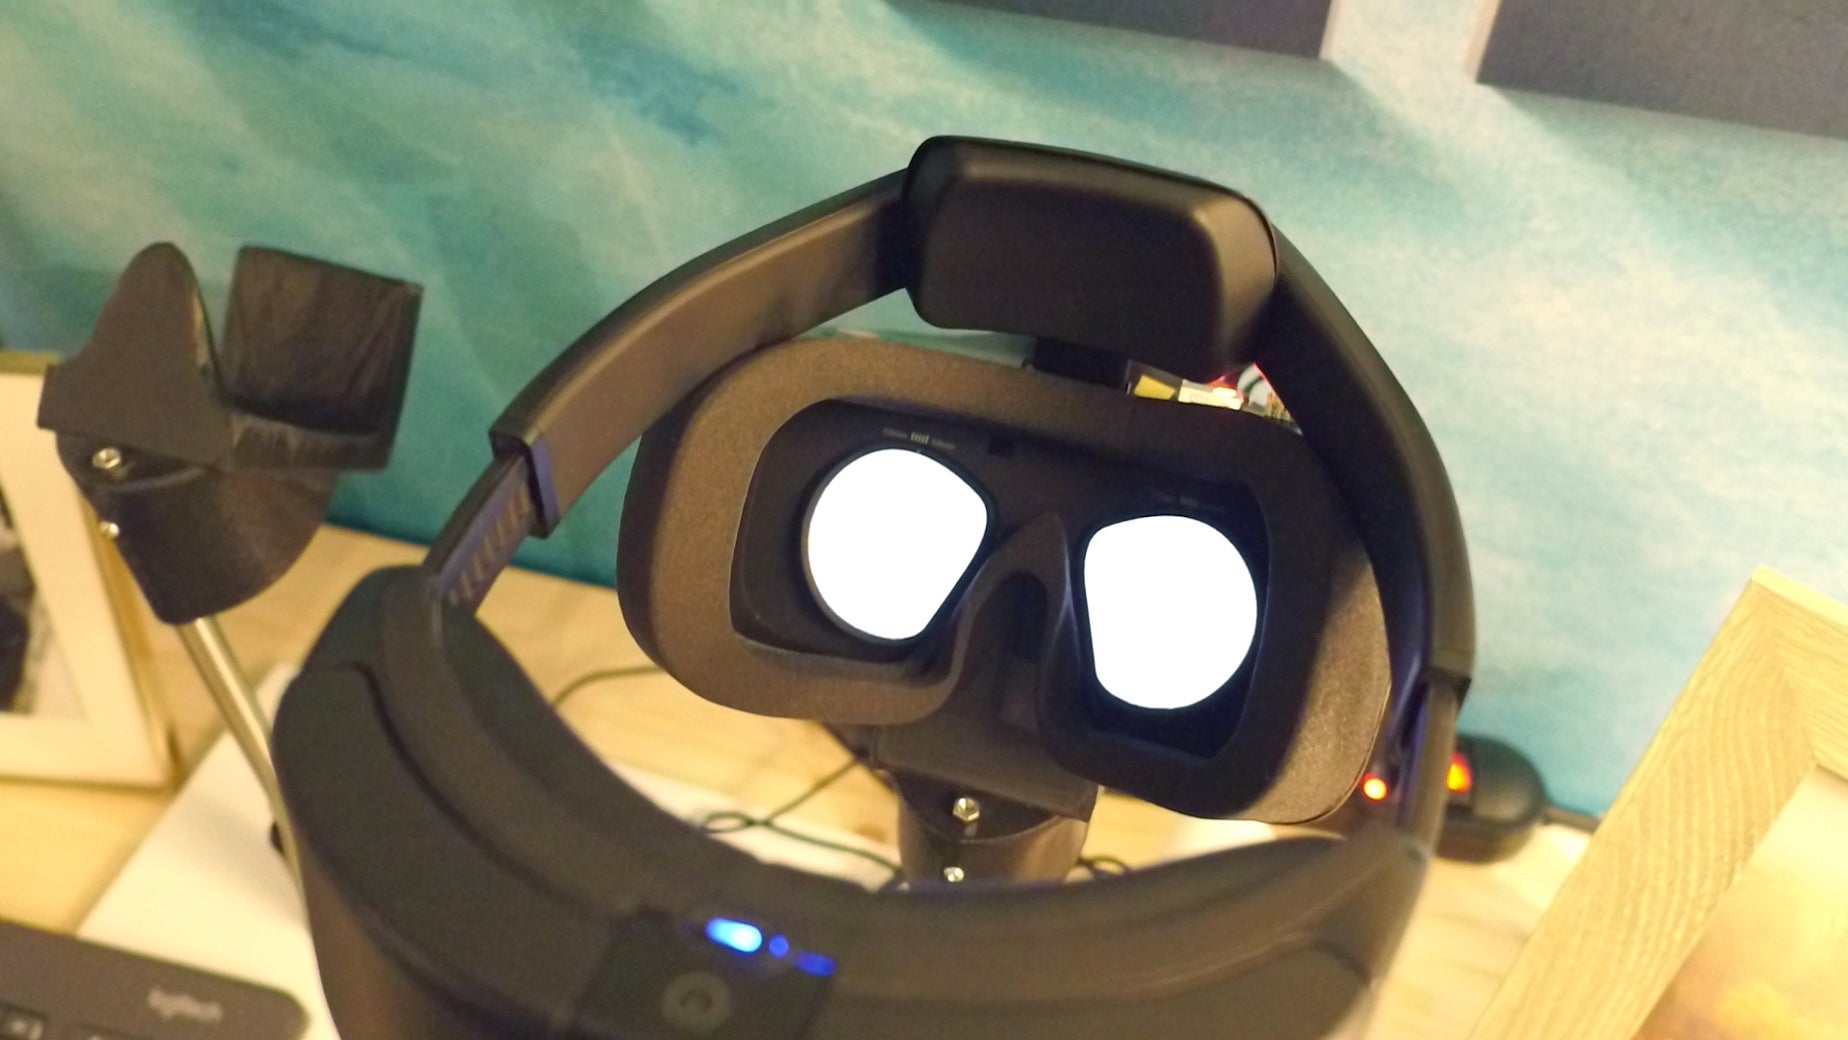 Intel’s Project Alloy Is How VR Should Be